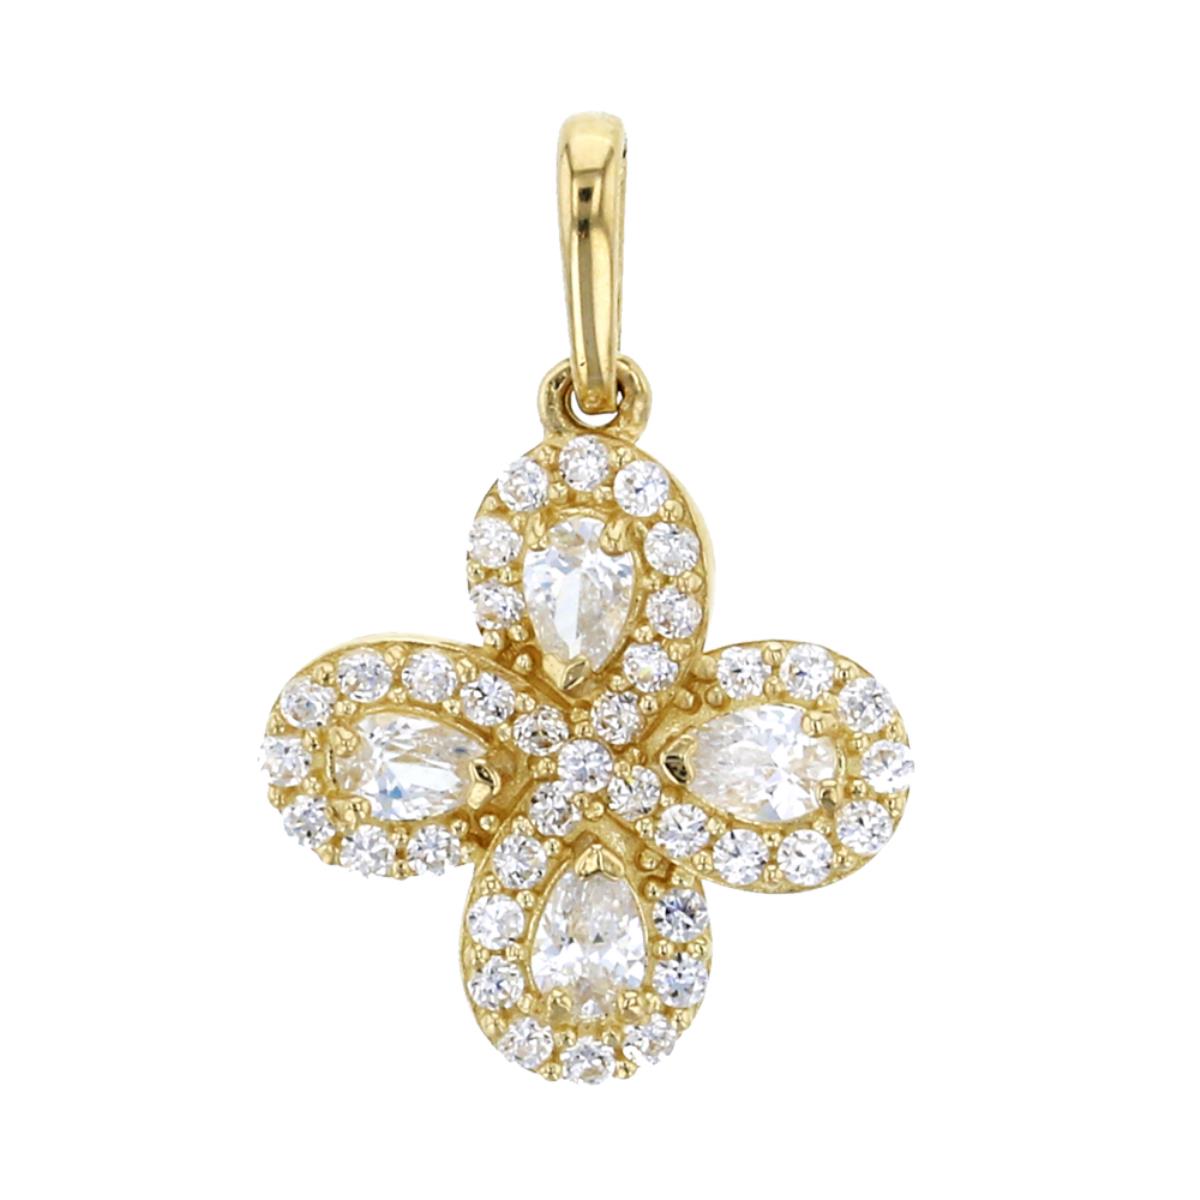 10K Yellow Gold Micropave Clover Dangling Pendant